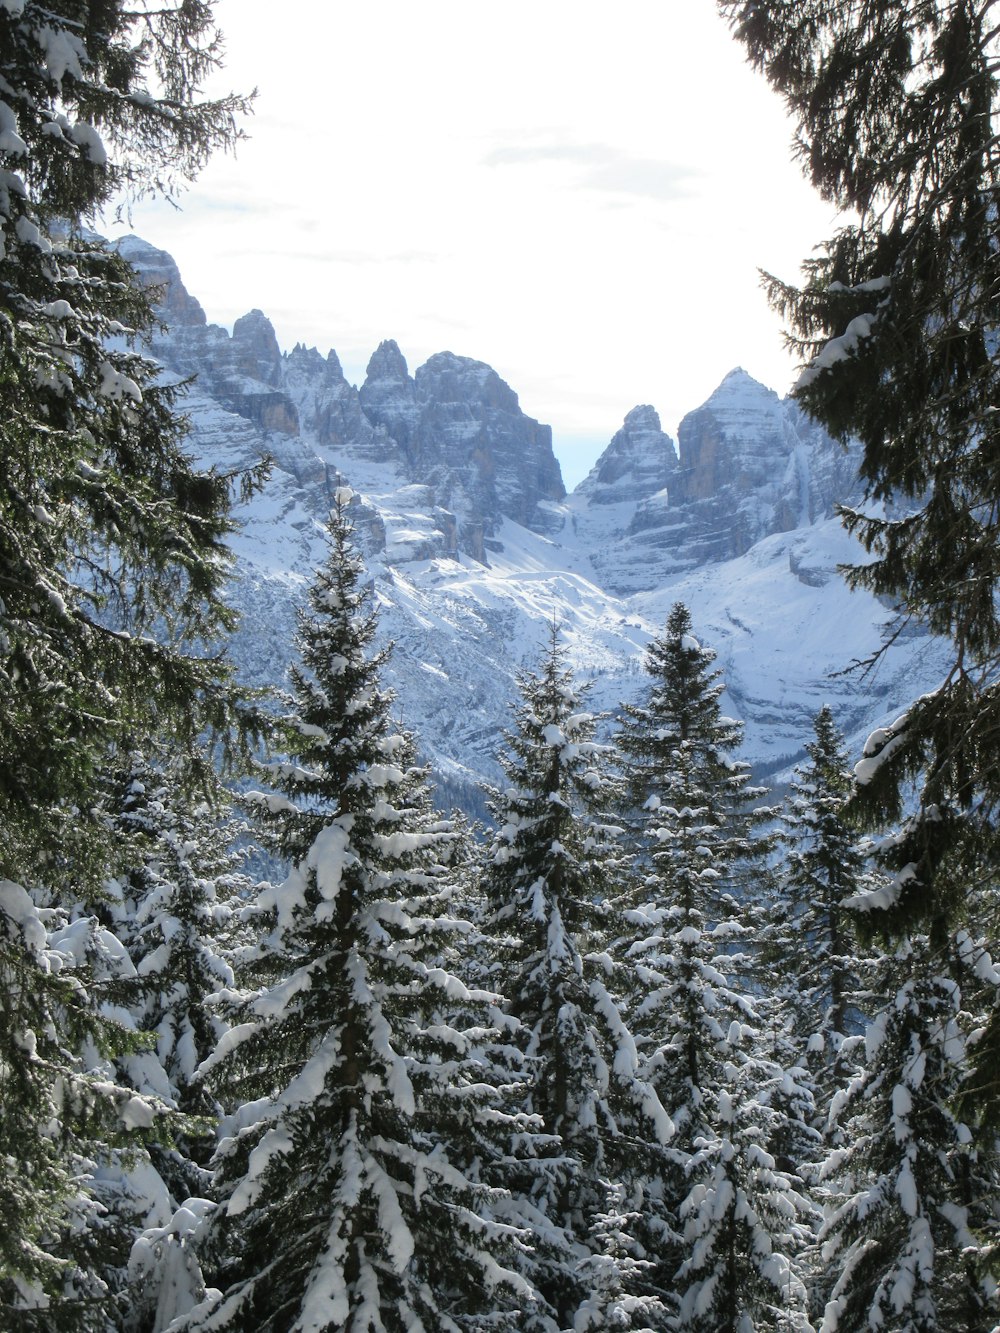 a snow covered forest with mountains in the background